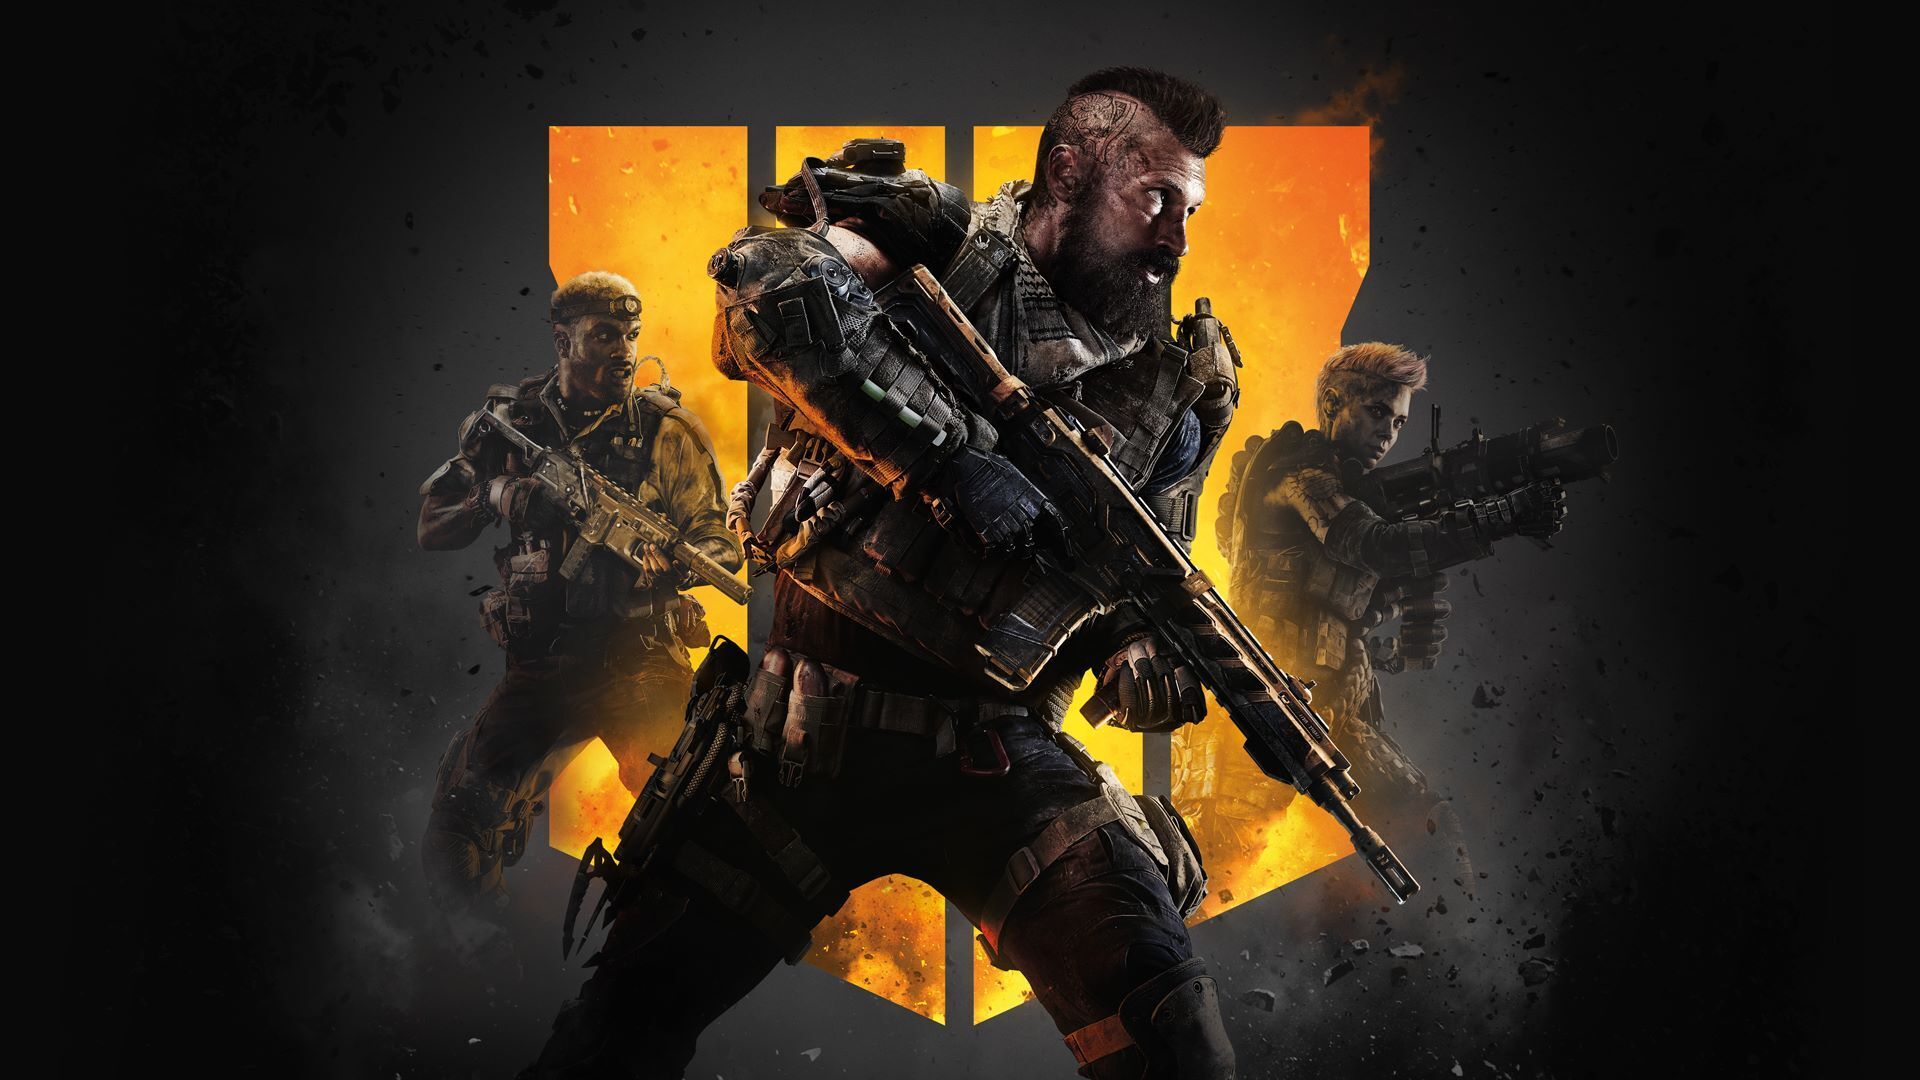 The developer behind the massive Call of Duty success has decided to hold off on launching League and Ranked play in order to fully develop the system.